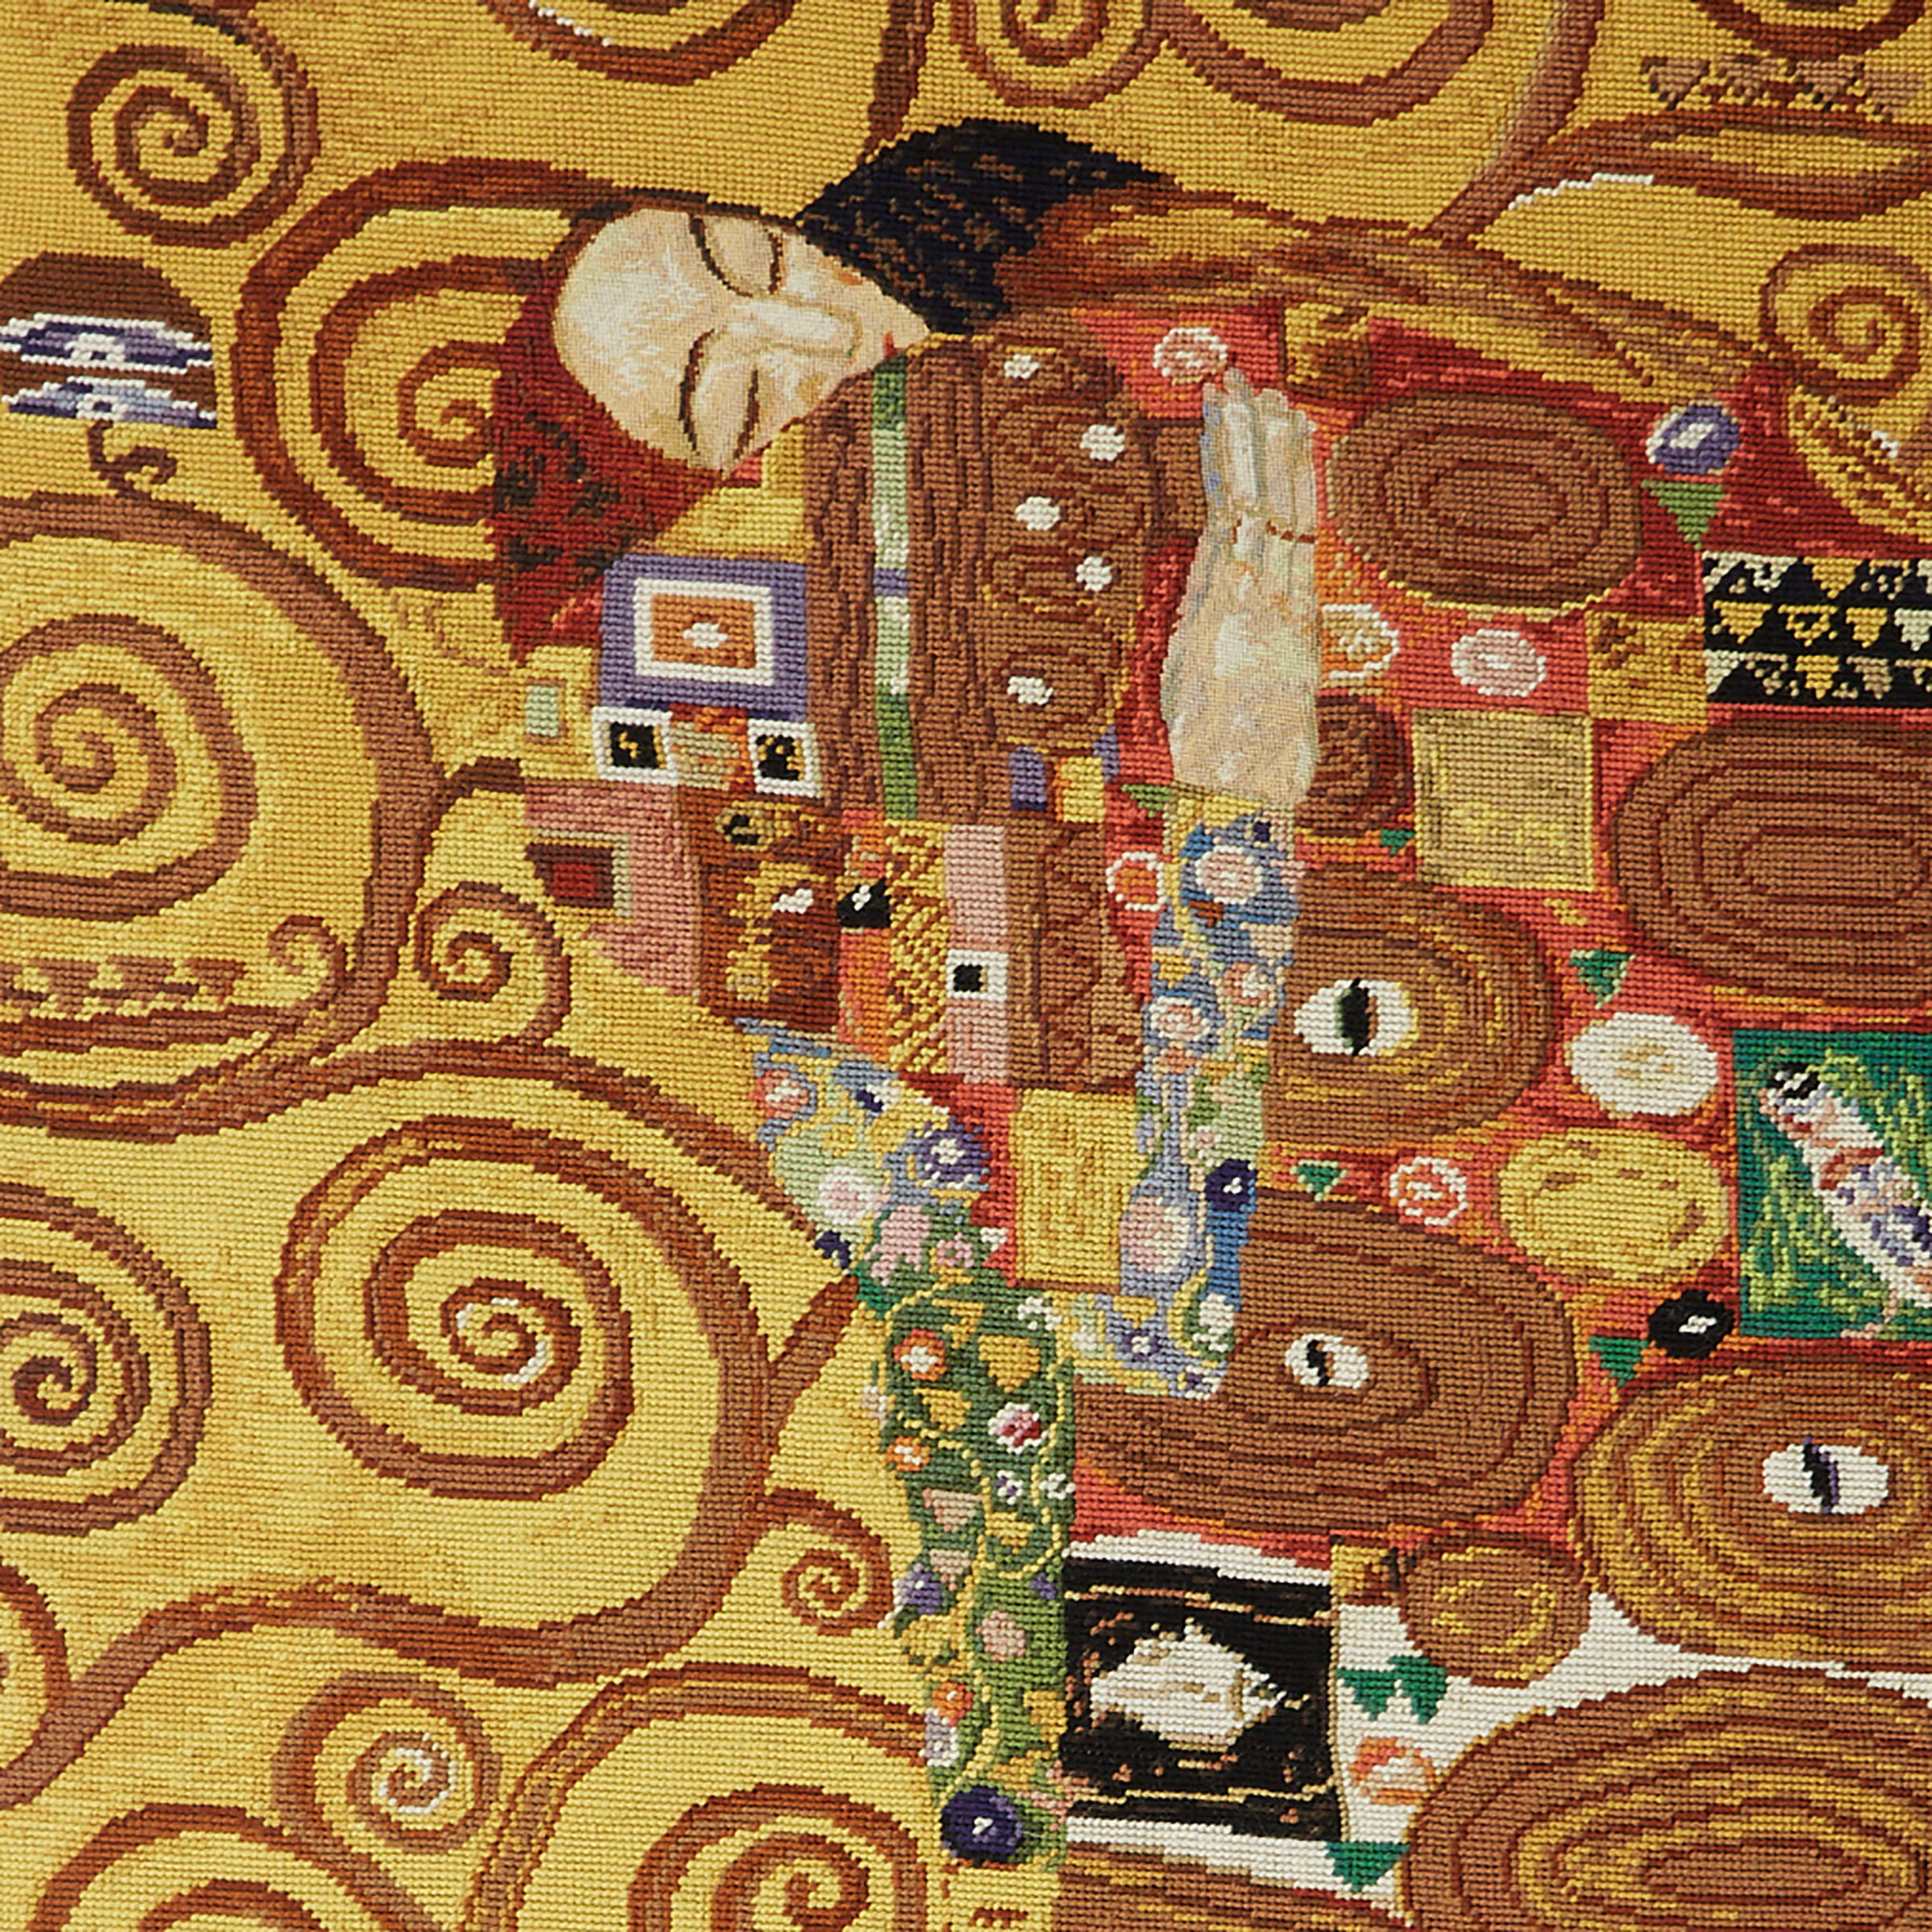 French Needlepoint Textile After Gustav Klimt’s “The Kiss”